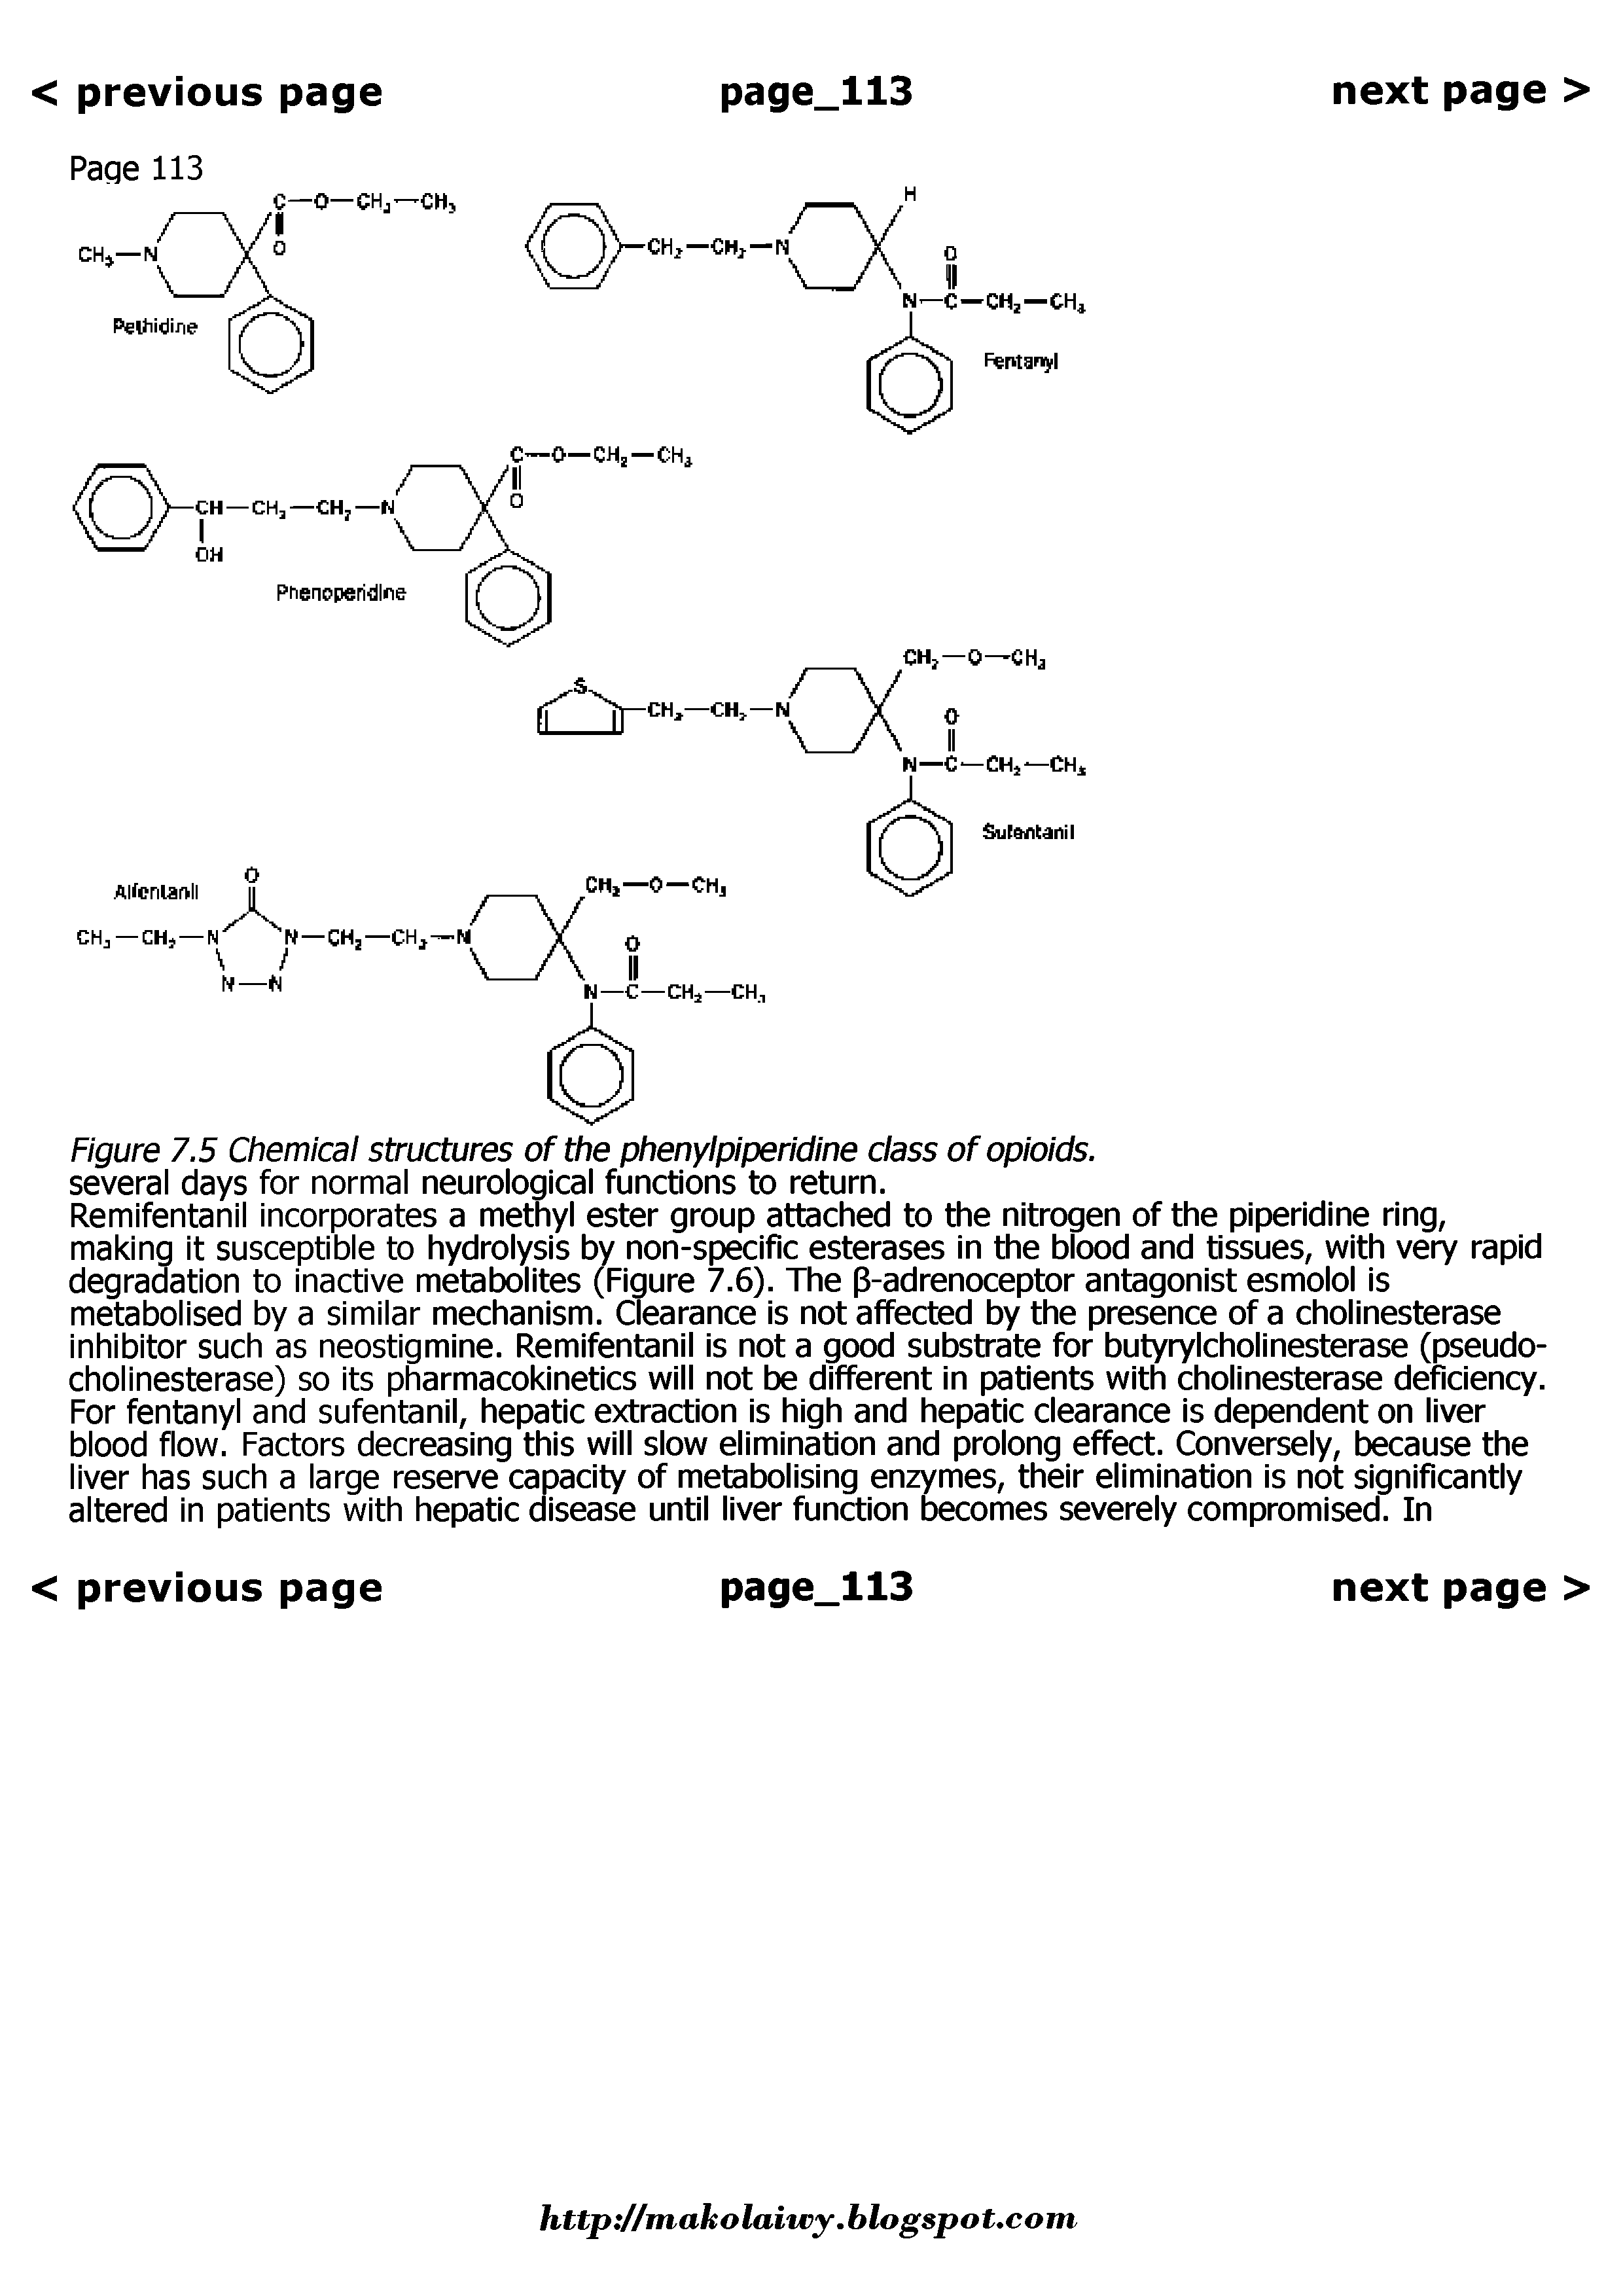 Figure 7.5 Chemical structures of the phenylpiperidine class of opioids. several days for normal neurological functions to return.